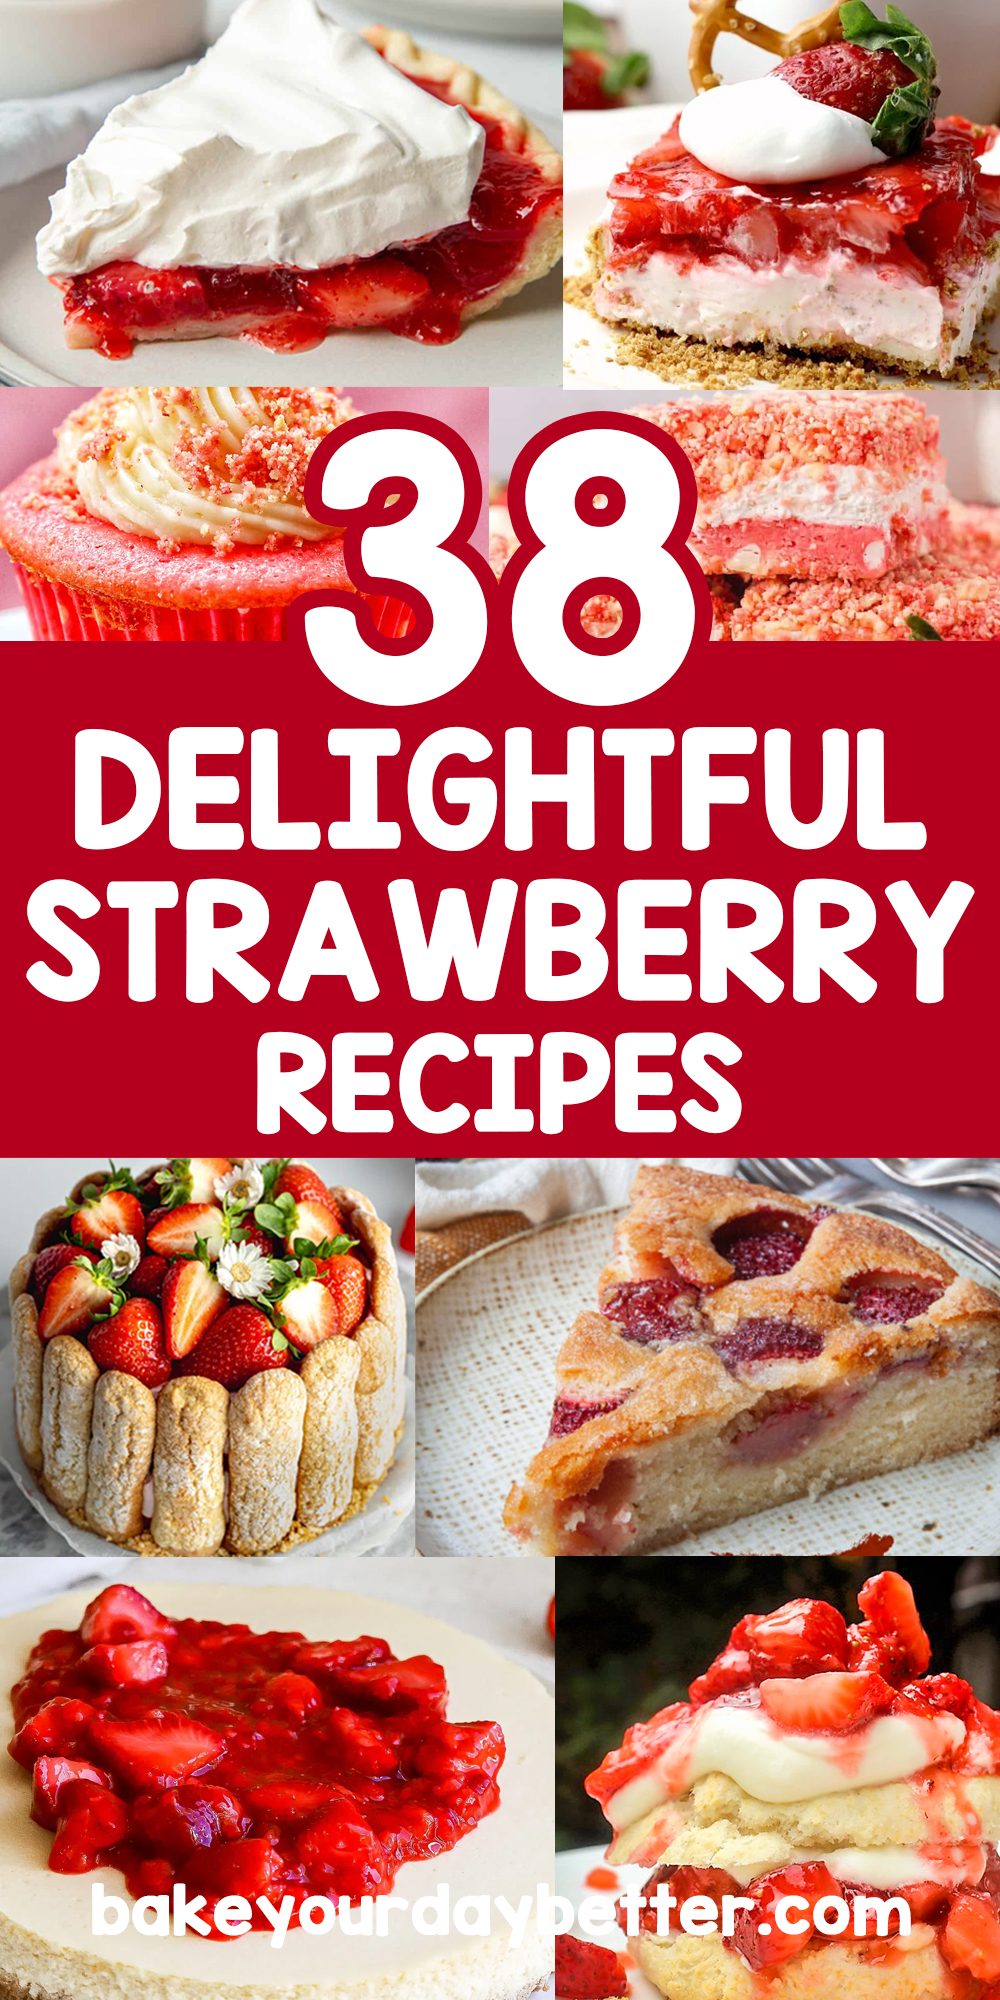 pictures of strawberry desserts with text overlay that says: 38 delightful strawberry recipes